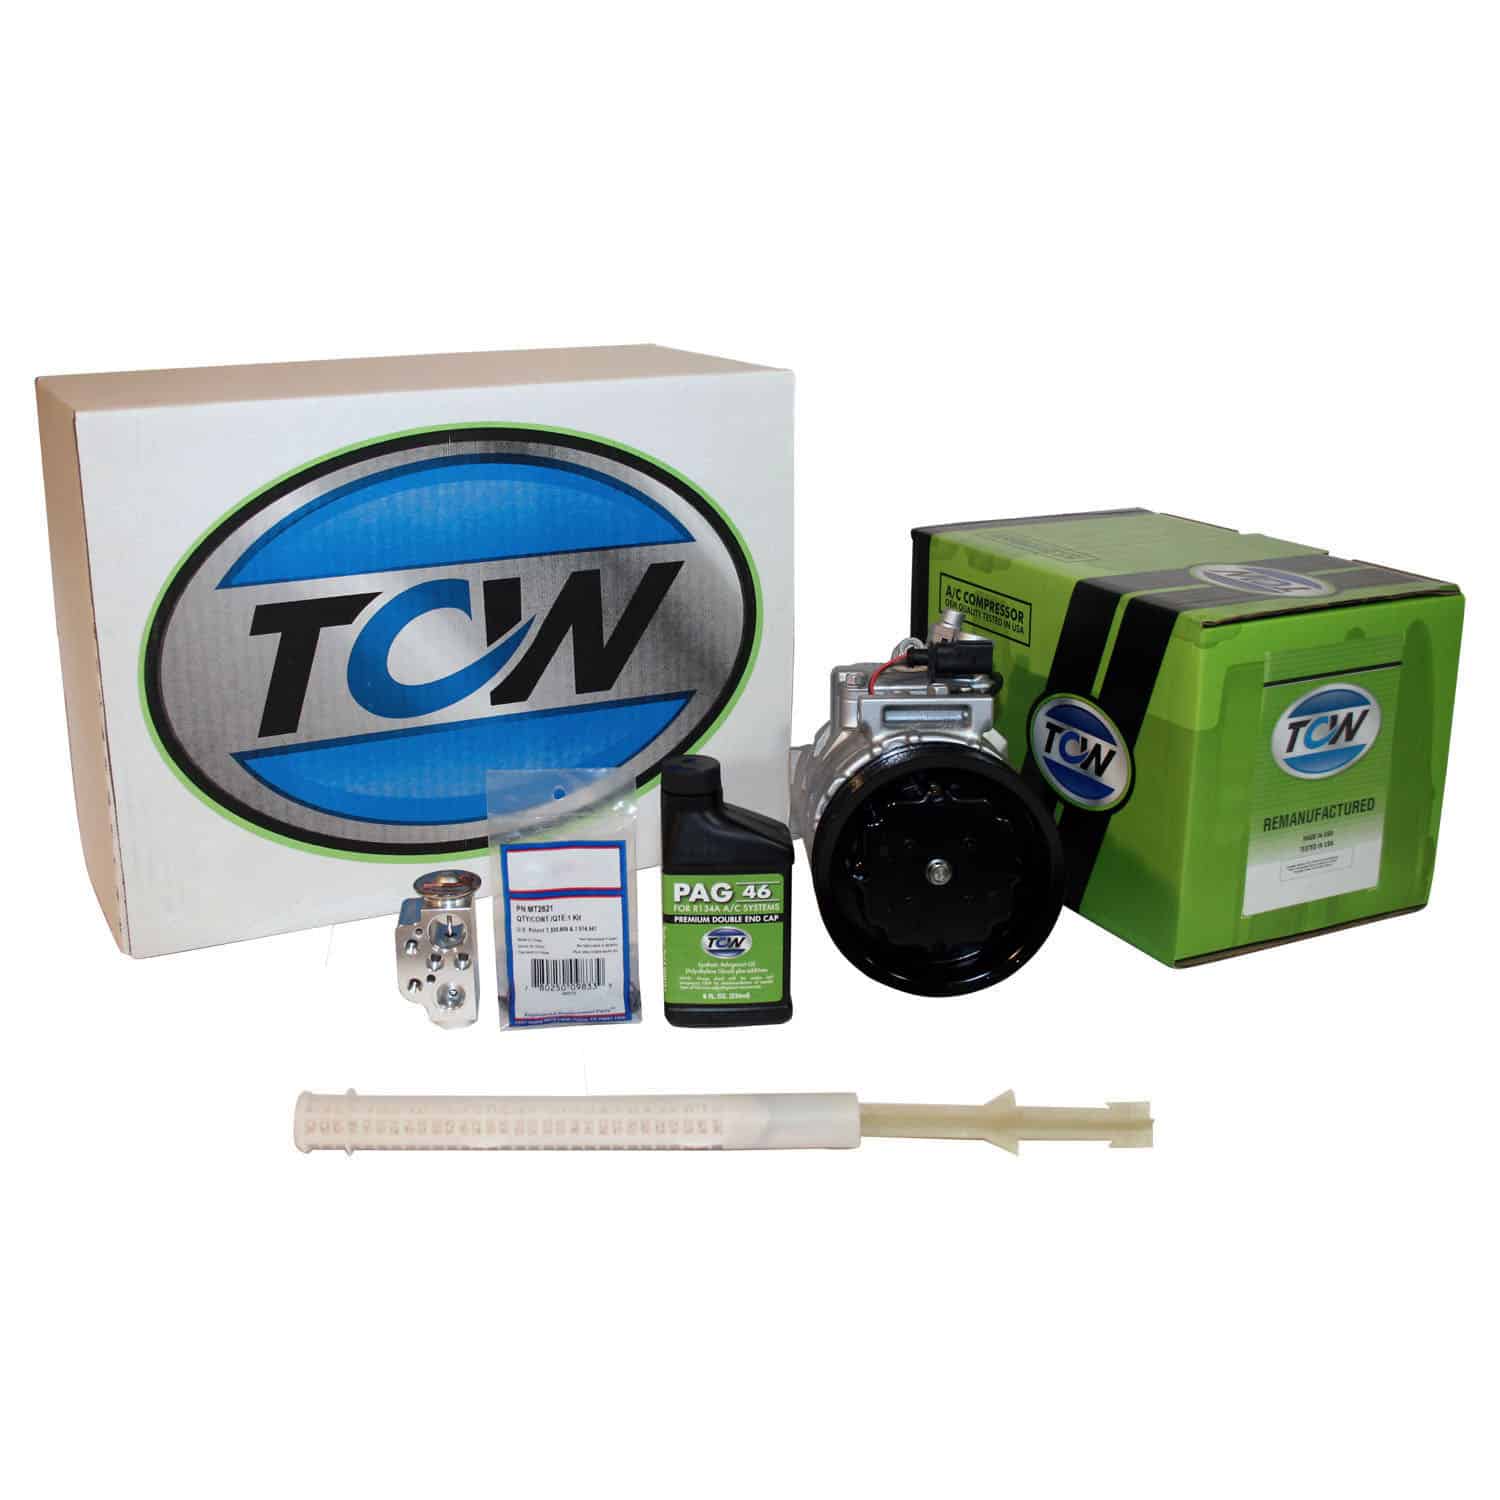 TCW Vehicle A/C Kit K1000420R Remanufactured Product Image field_60b6a13a6e67c